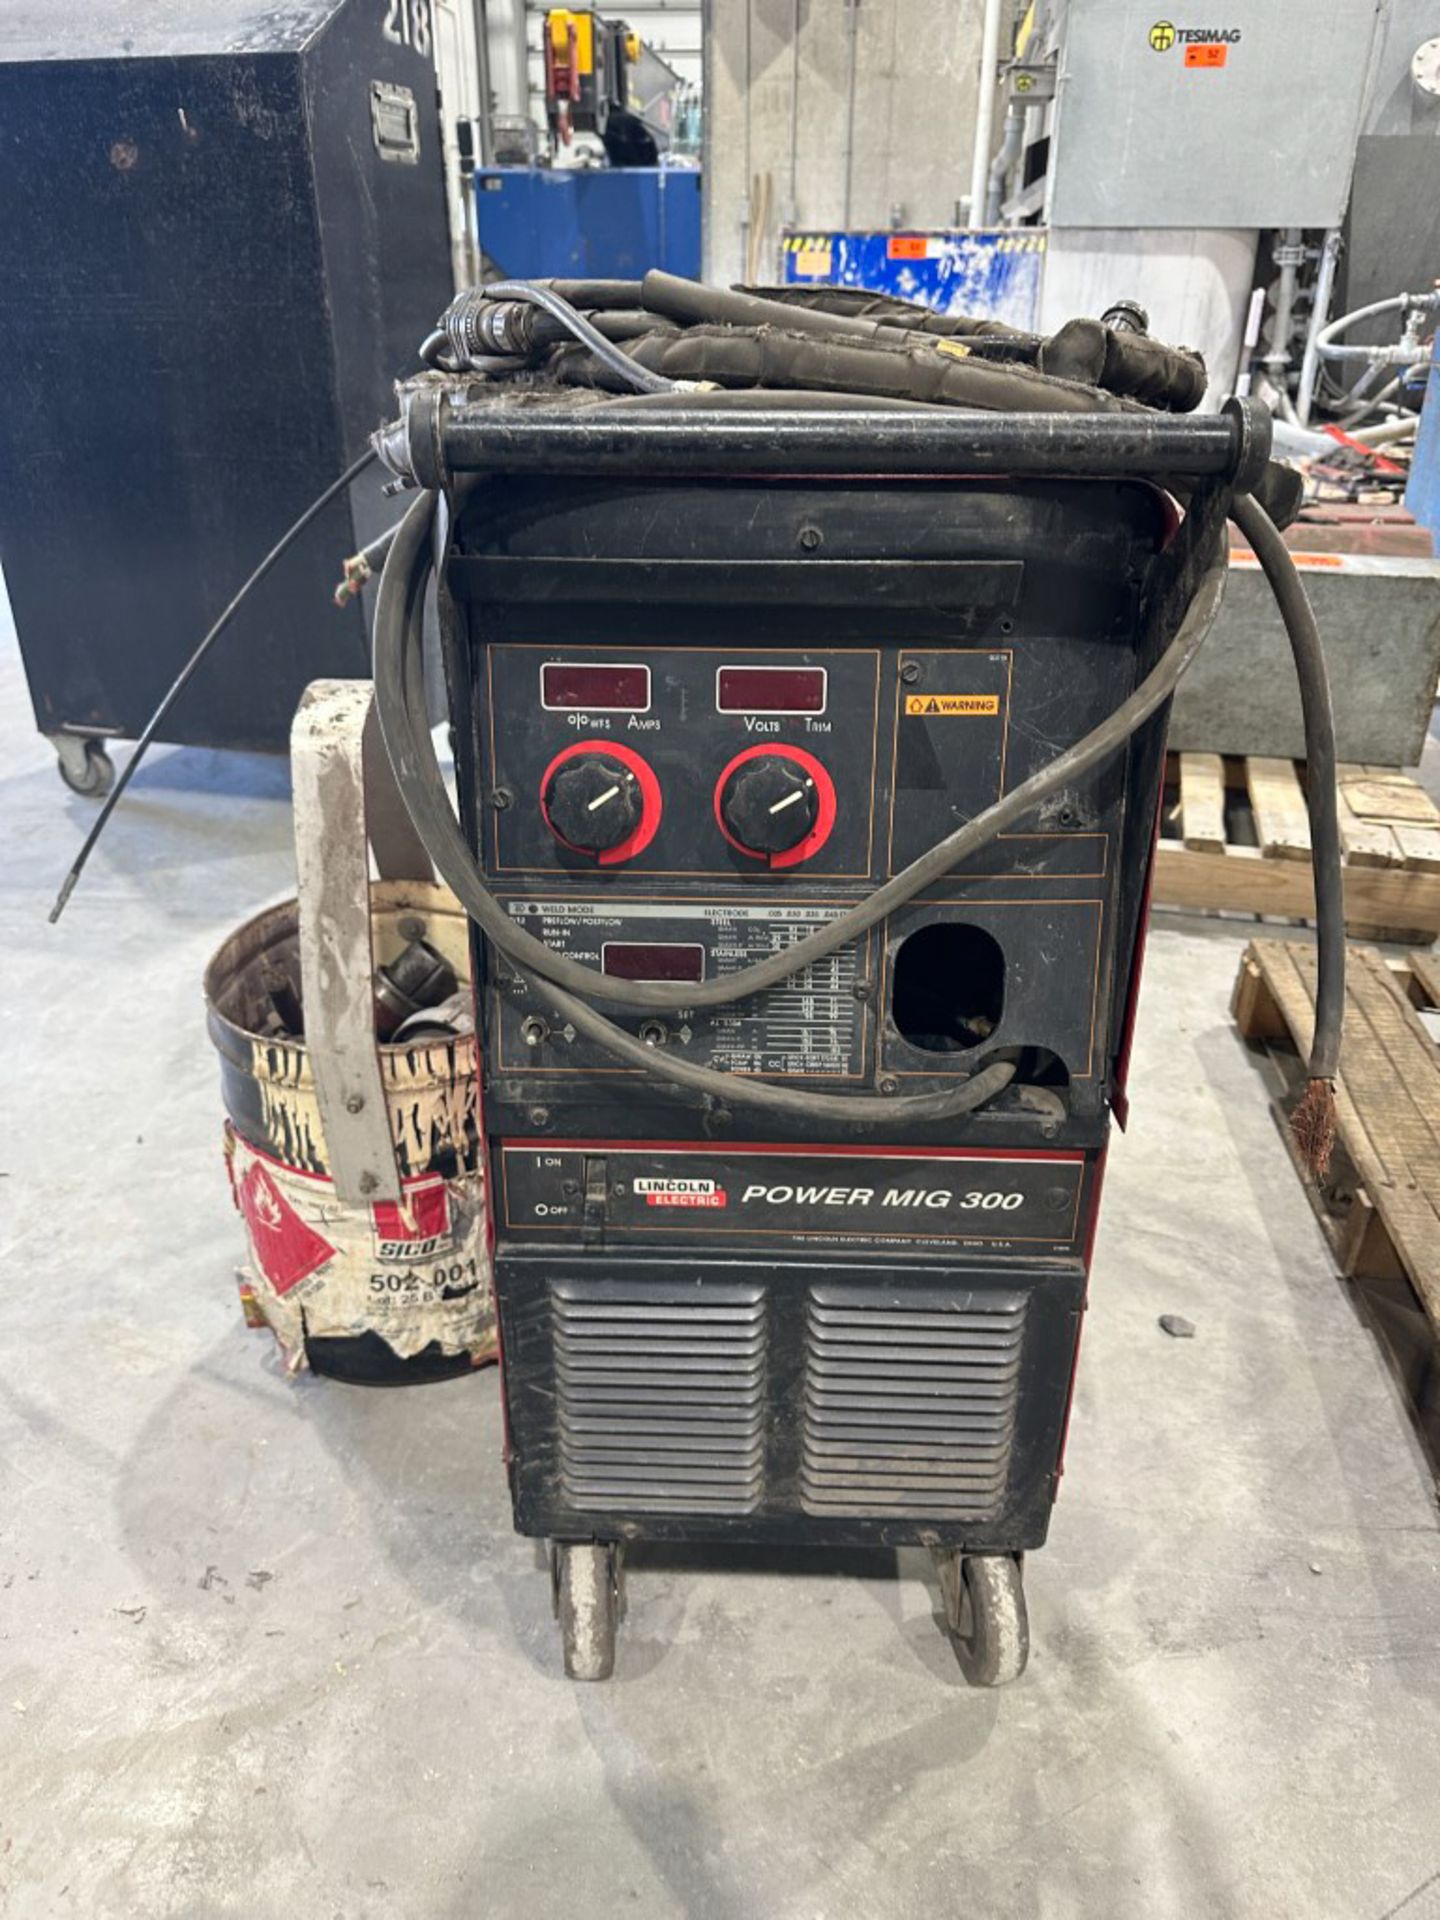 LINCOLN POWER MIG 300 portable MIG welder with cables and gun, s/n n/a - Image 2 of 2